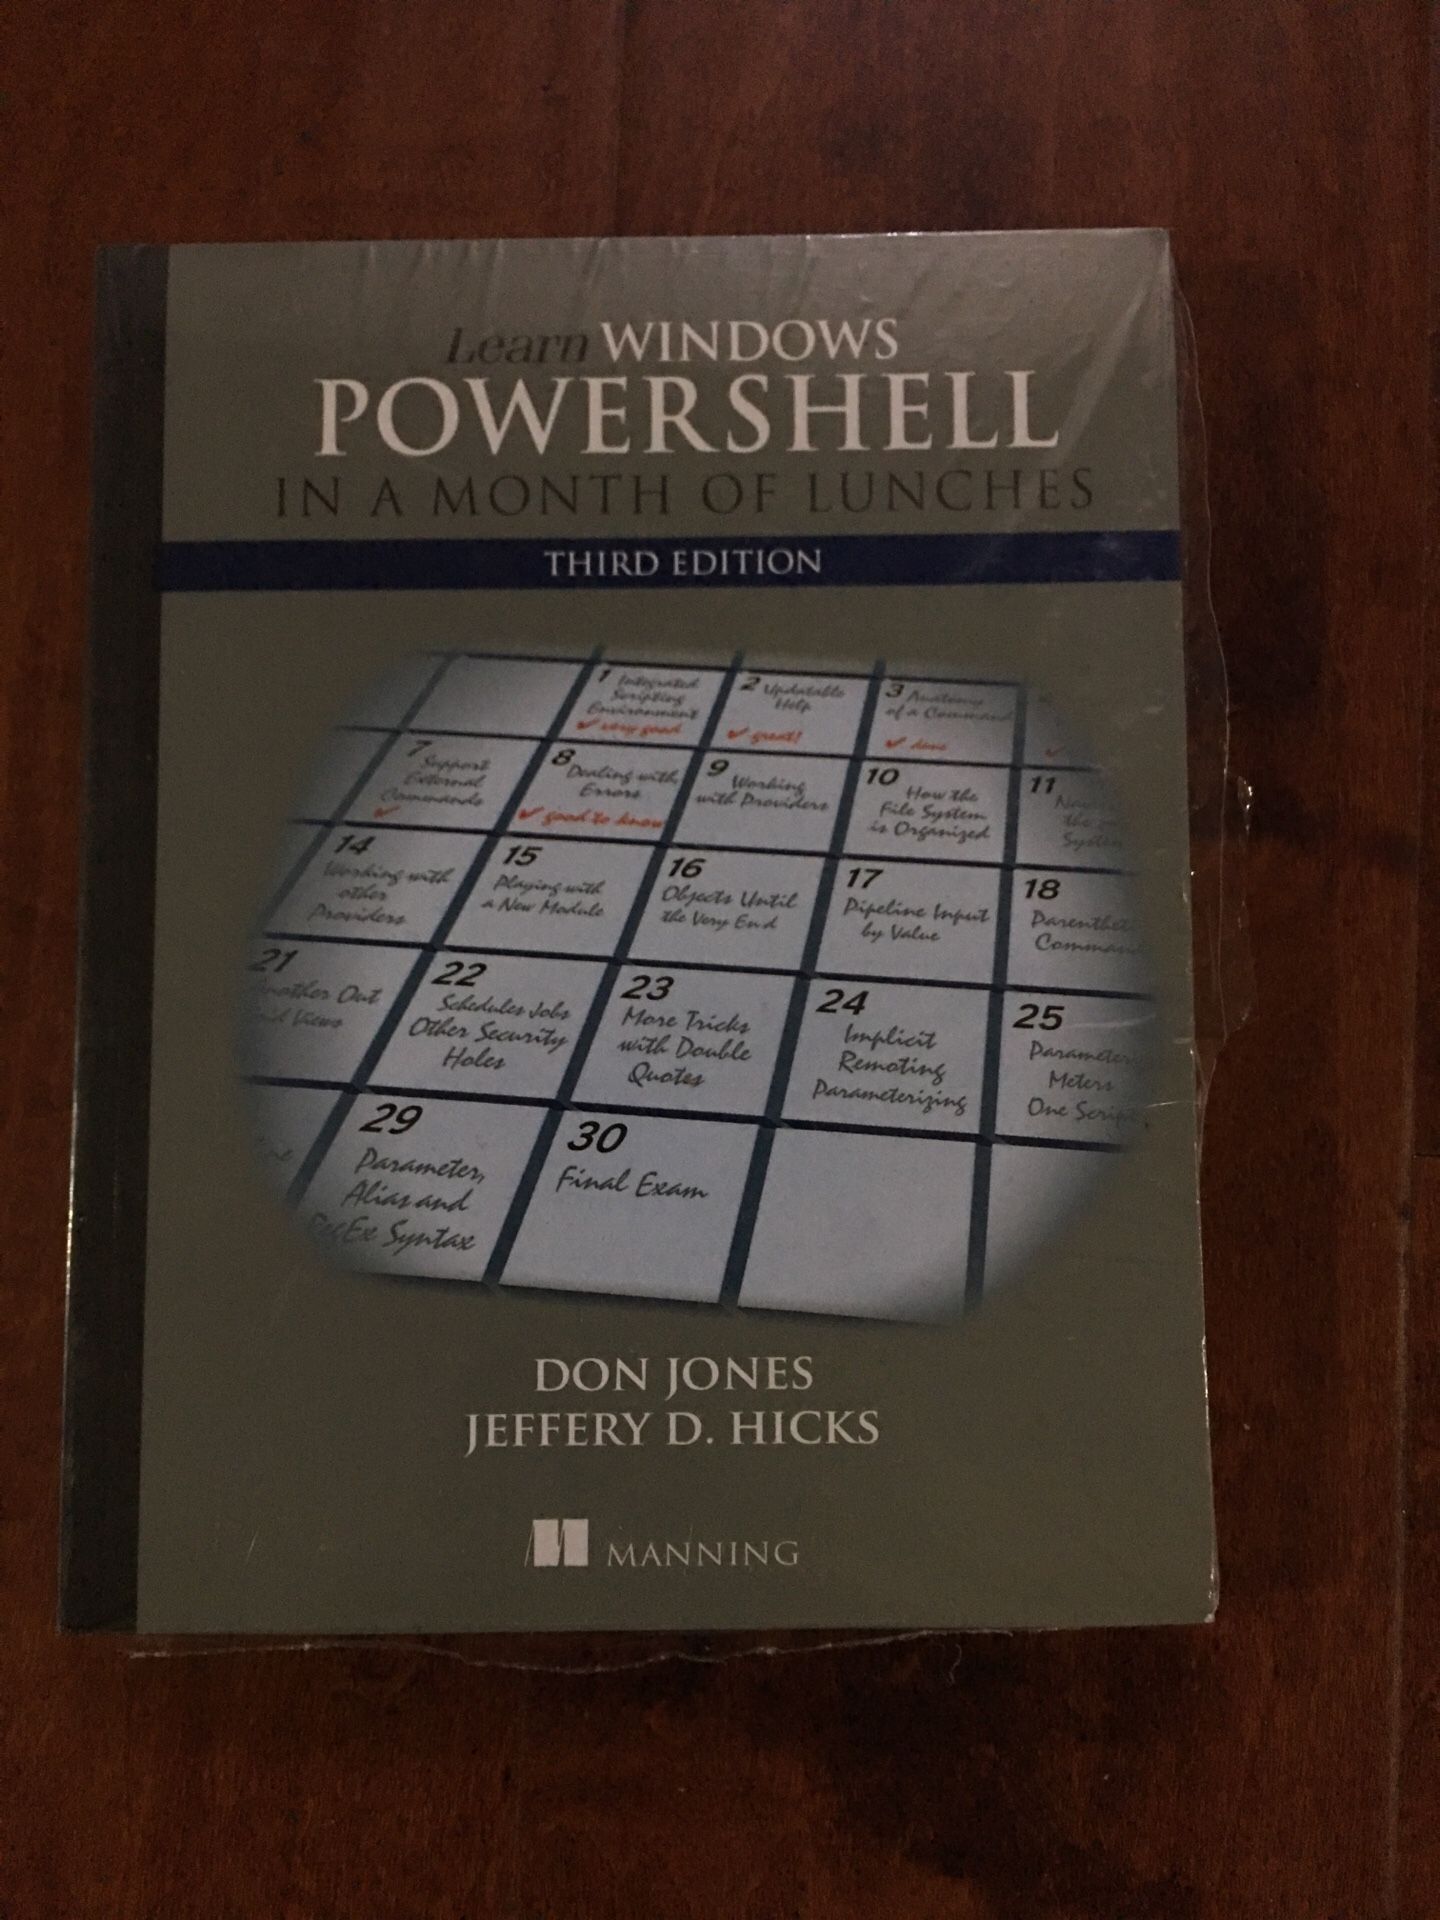 Learn Windows PowerShell in a Month of Lunches 3rd Edition ISBN-13: 978-1617294167, ISBN-10: 1617294160